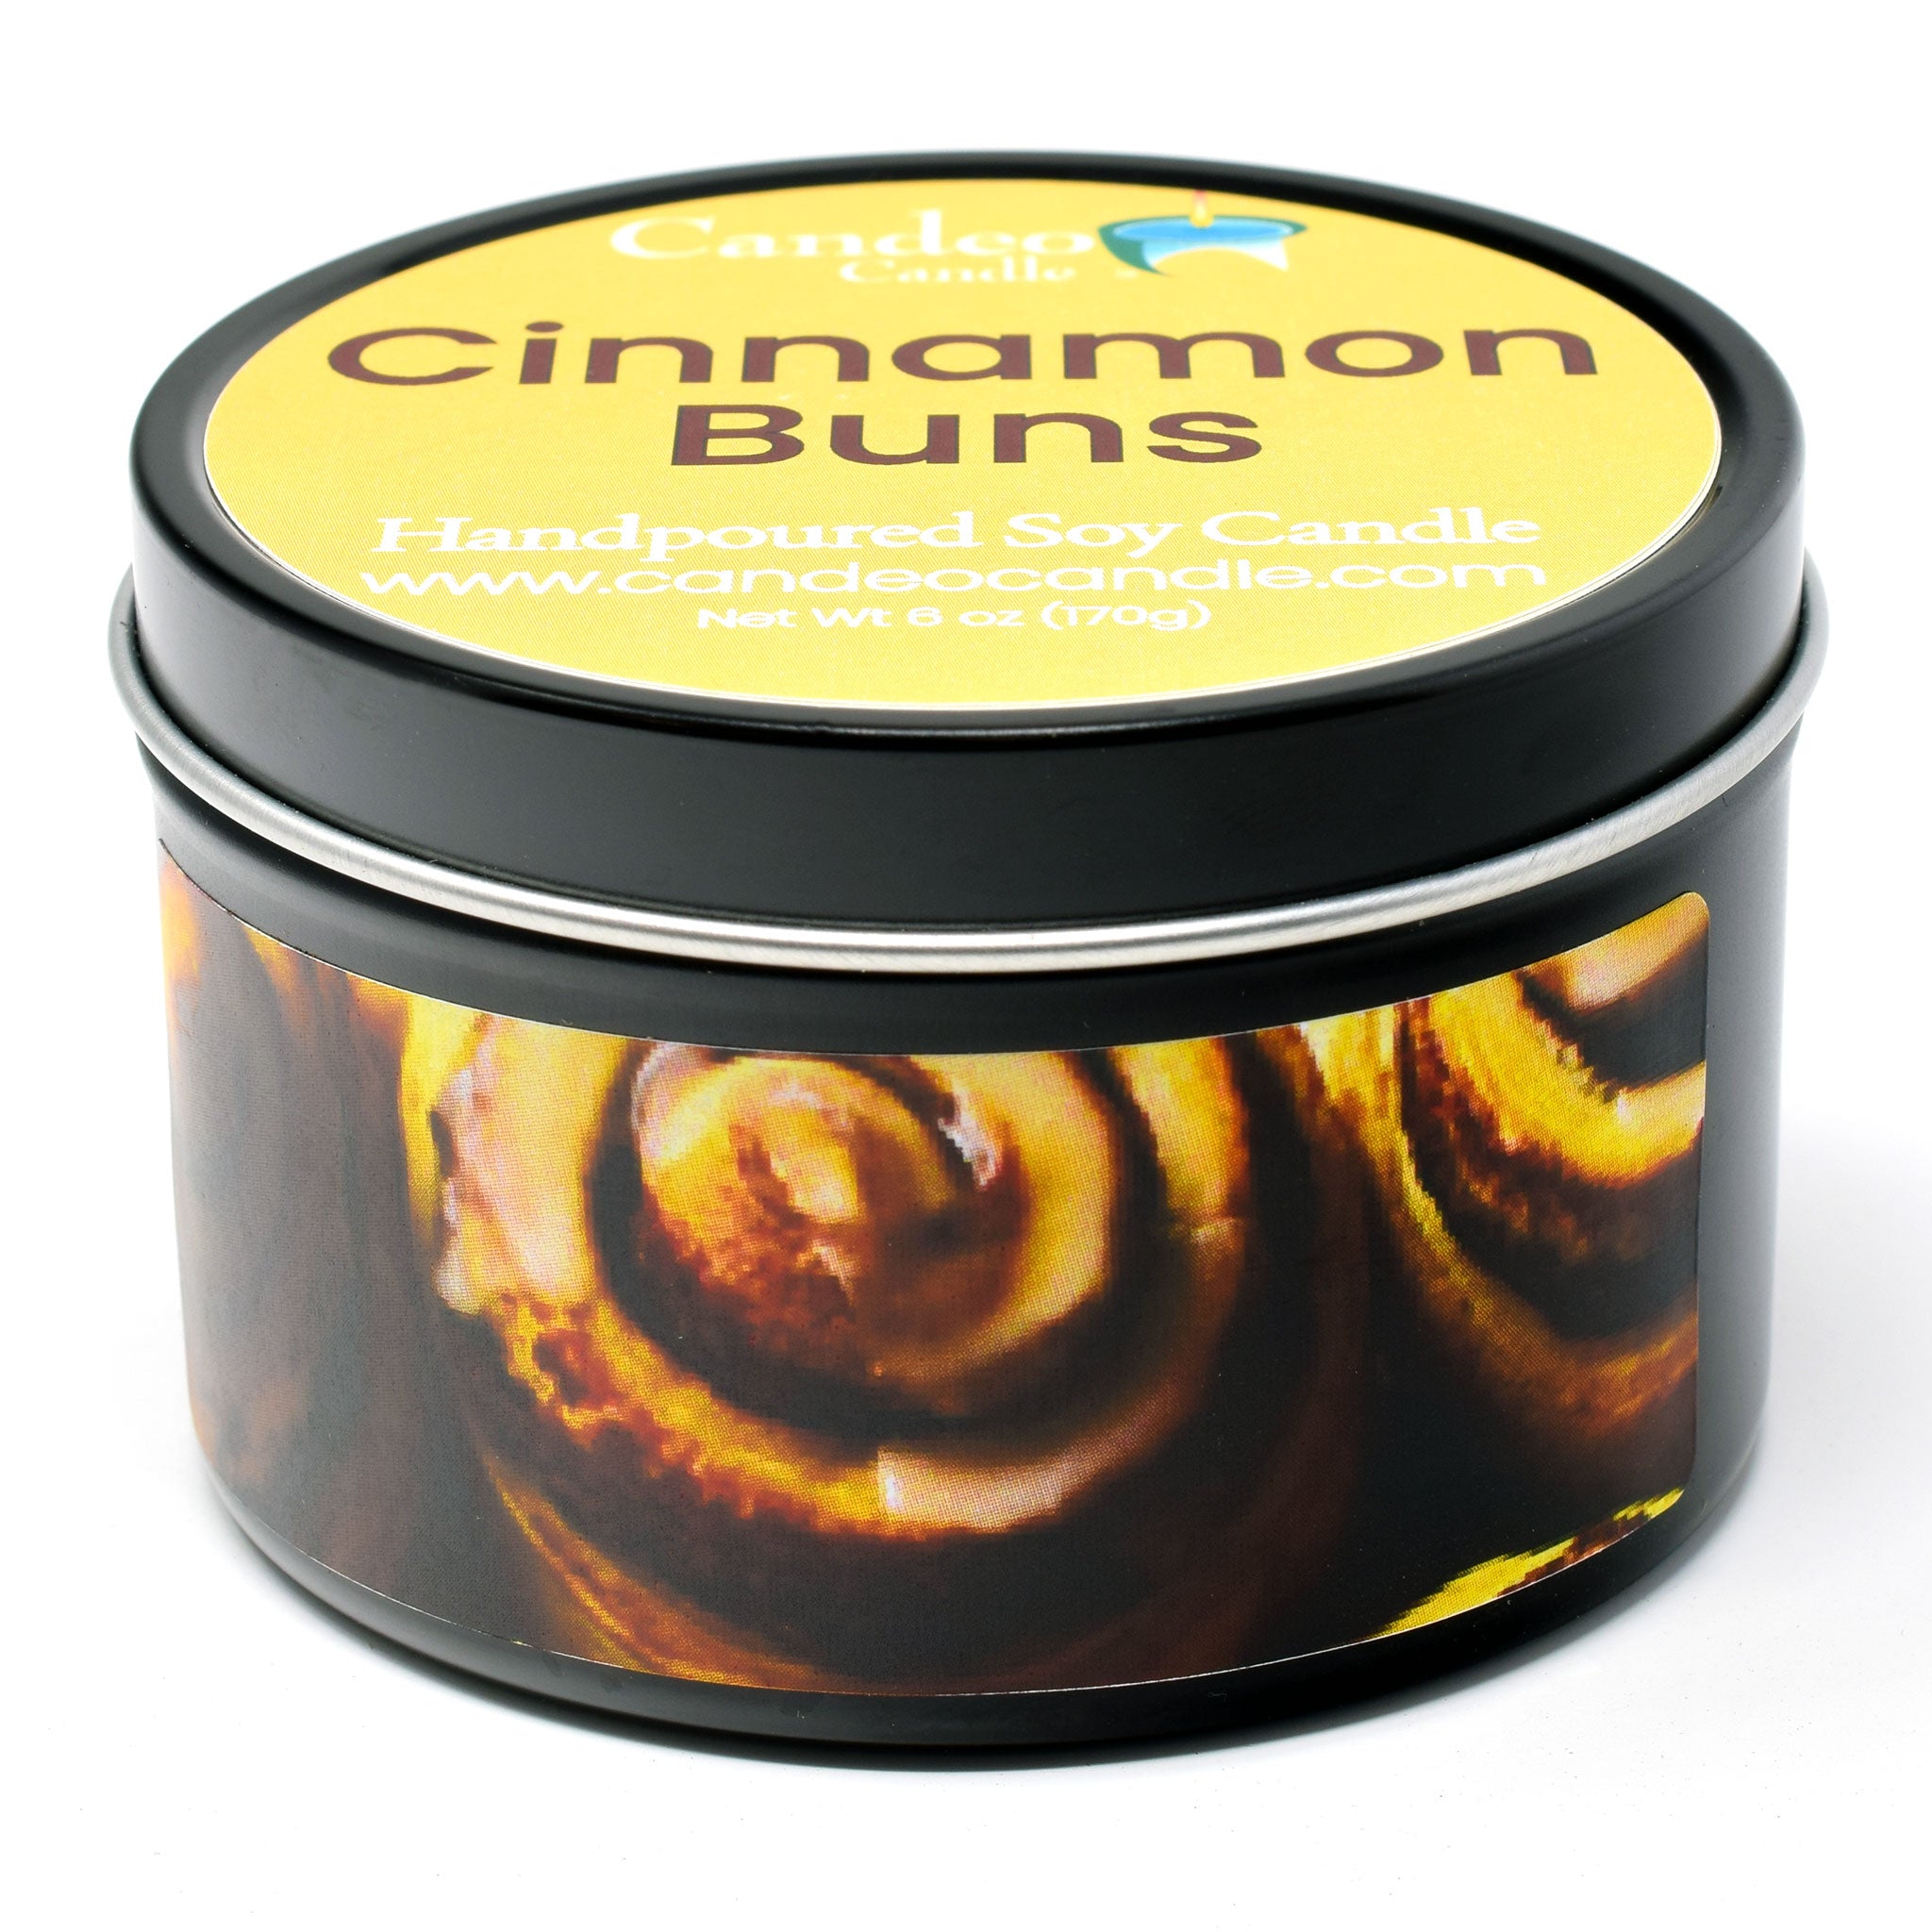 Cinnamon Buns Scented Black Soy Candle Tin